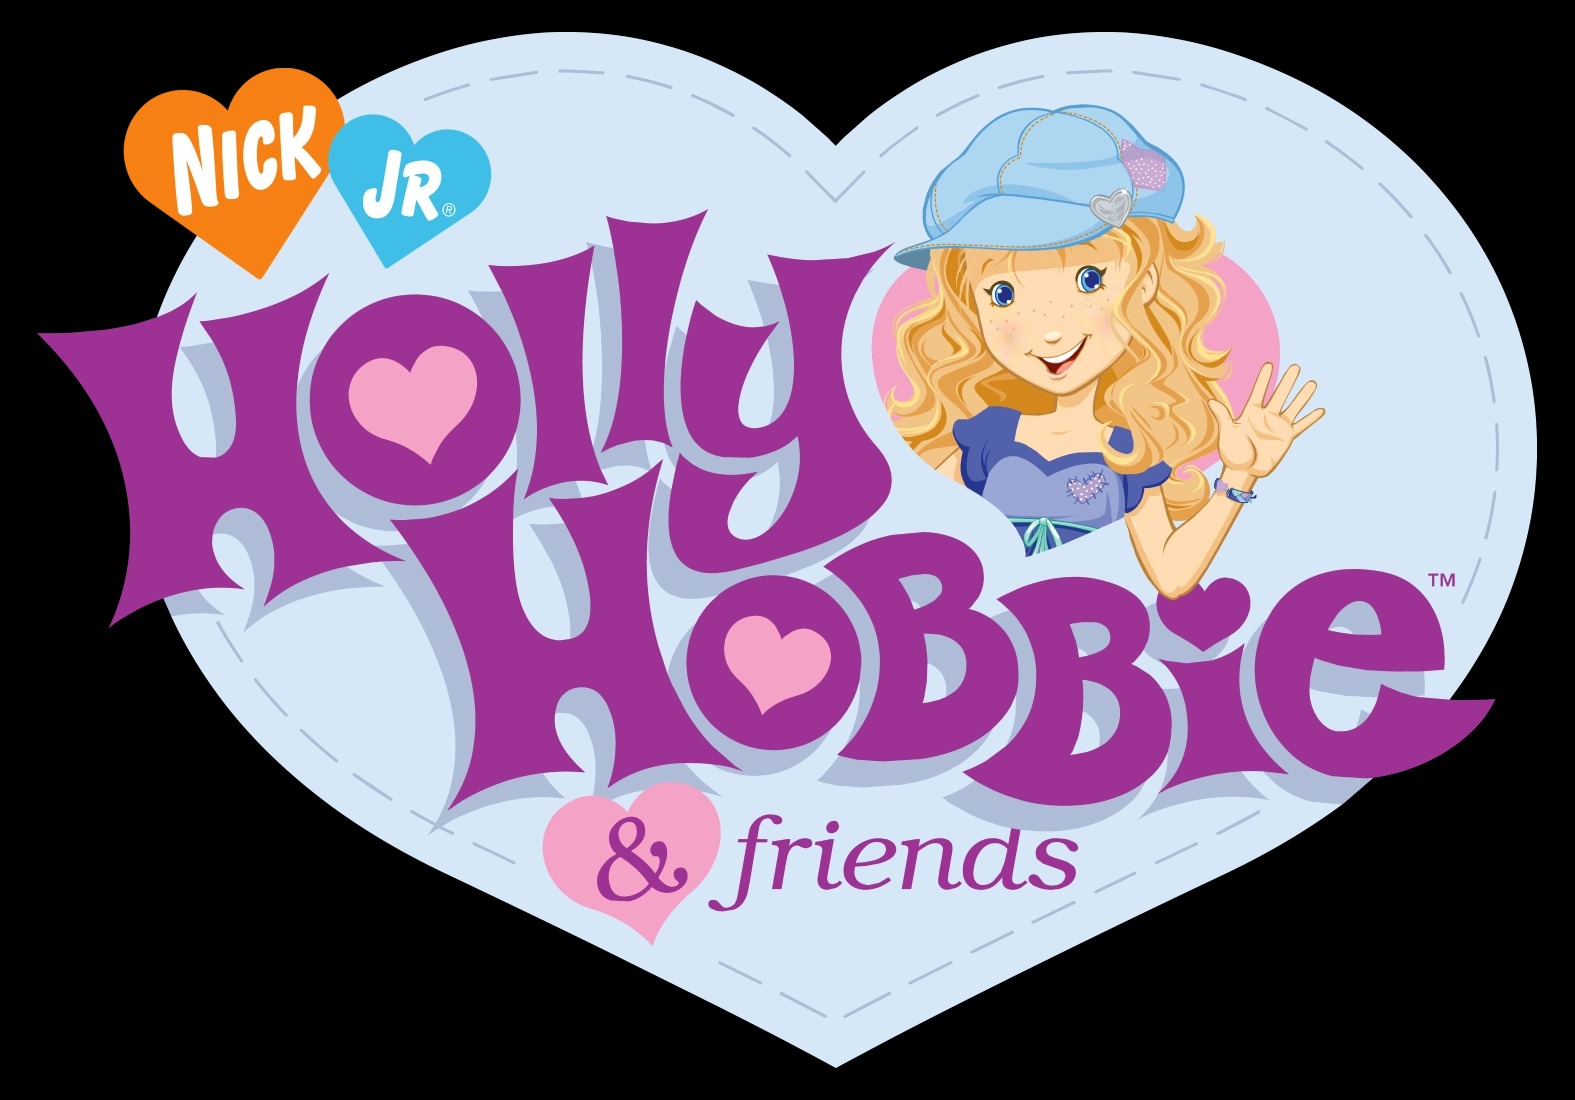 21-facts-about-holly-hobbie-holly-hobbie-and-friends